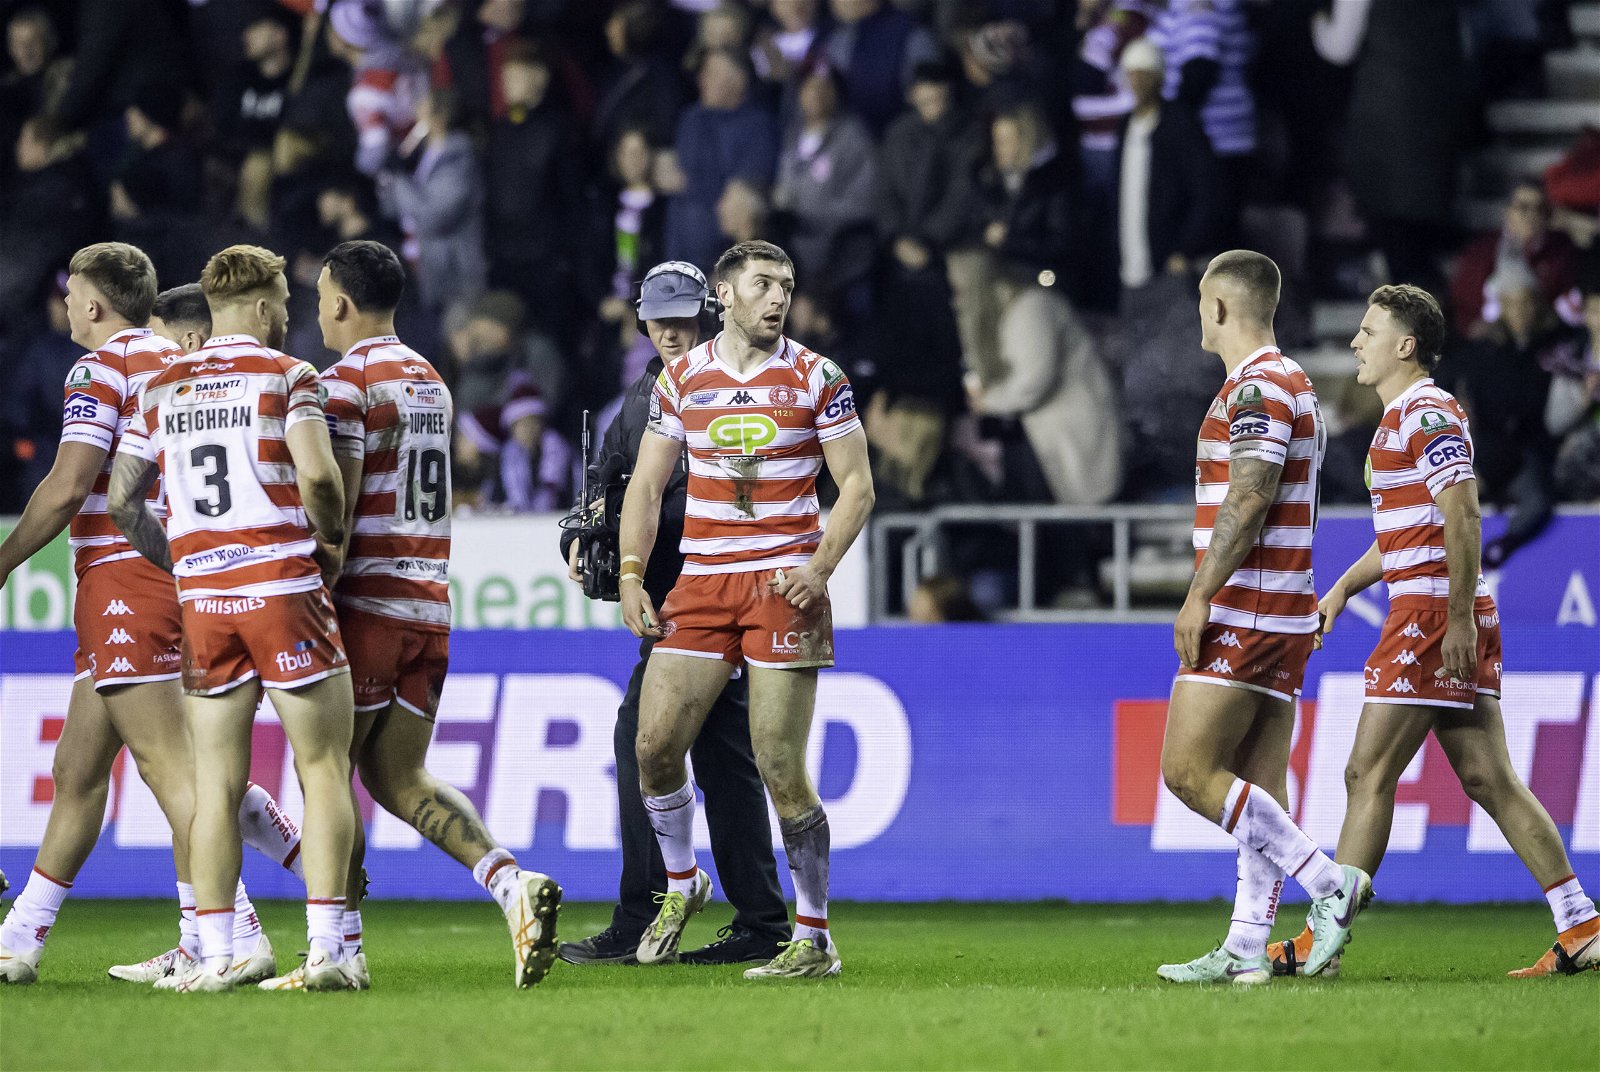 Wigan's Jake Wardle after his try against Penrith